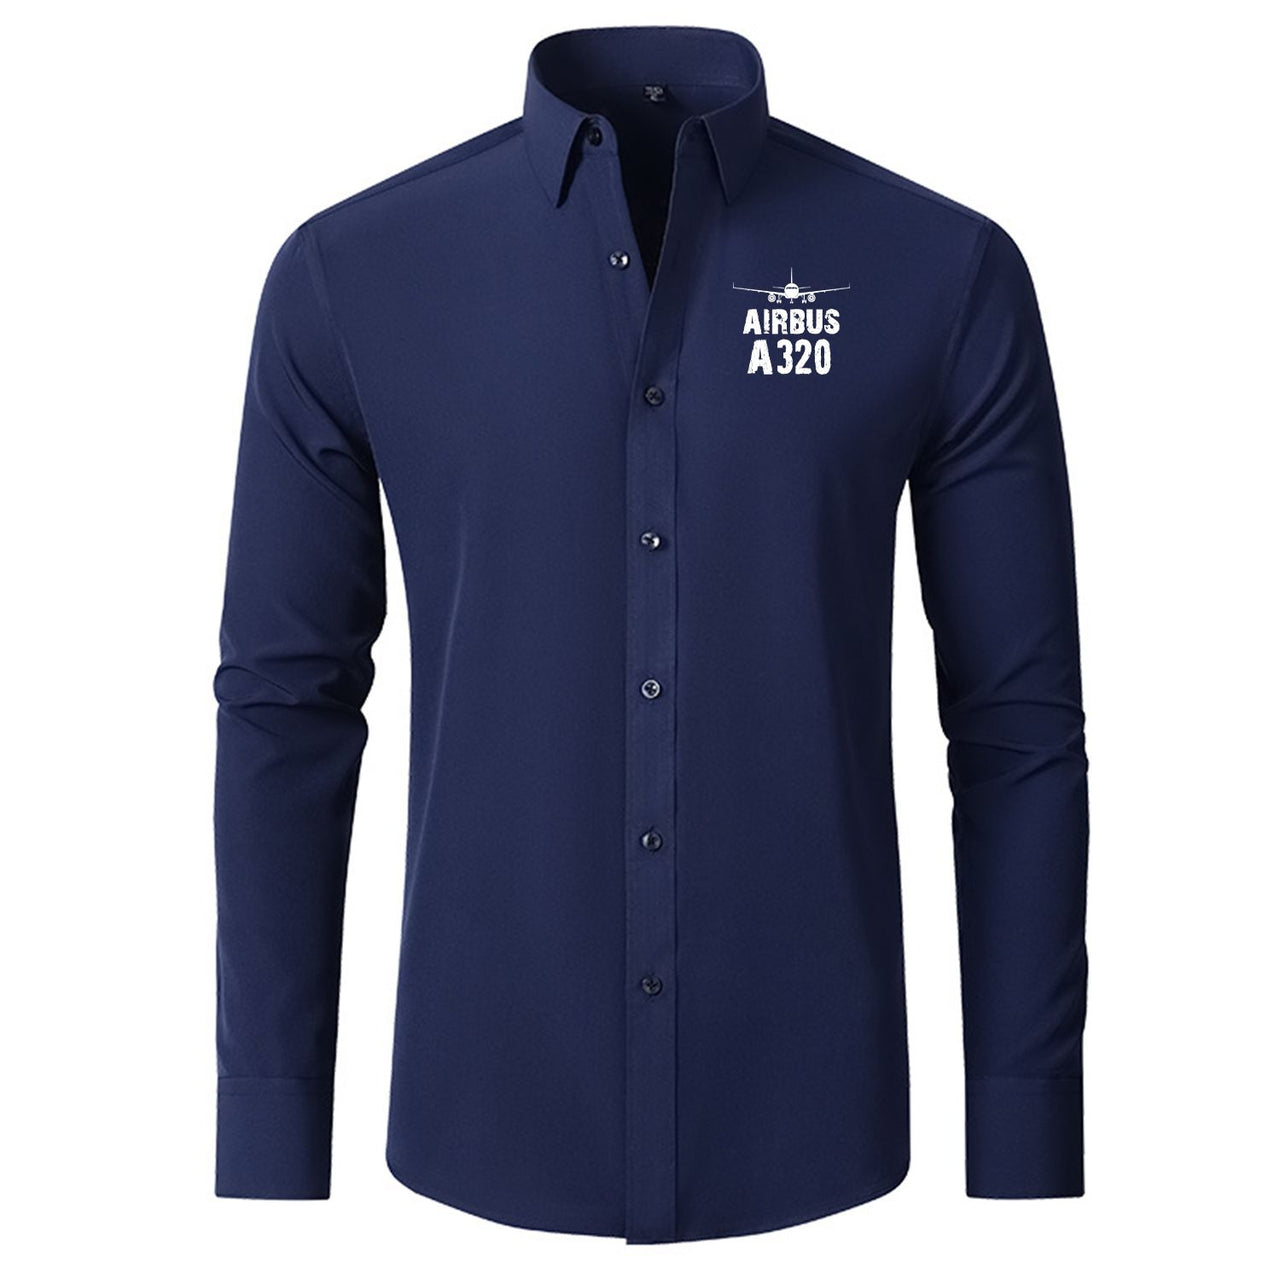 Airbus A320 & Plane Designed Long Sleeve Shirts